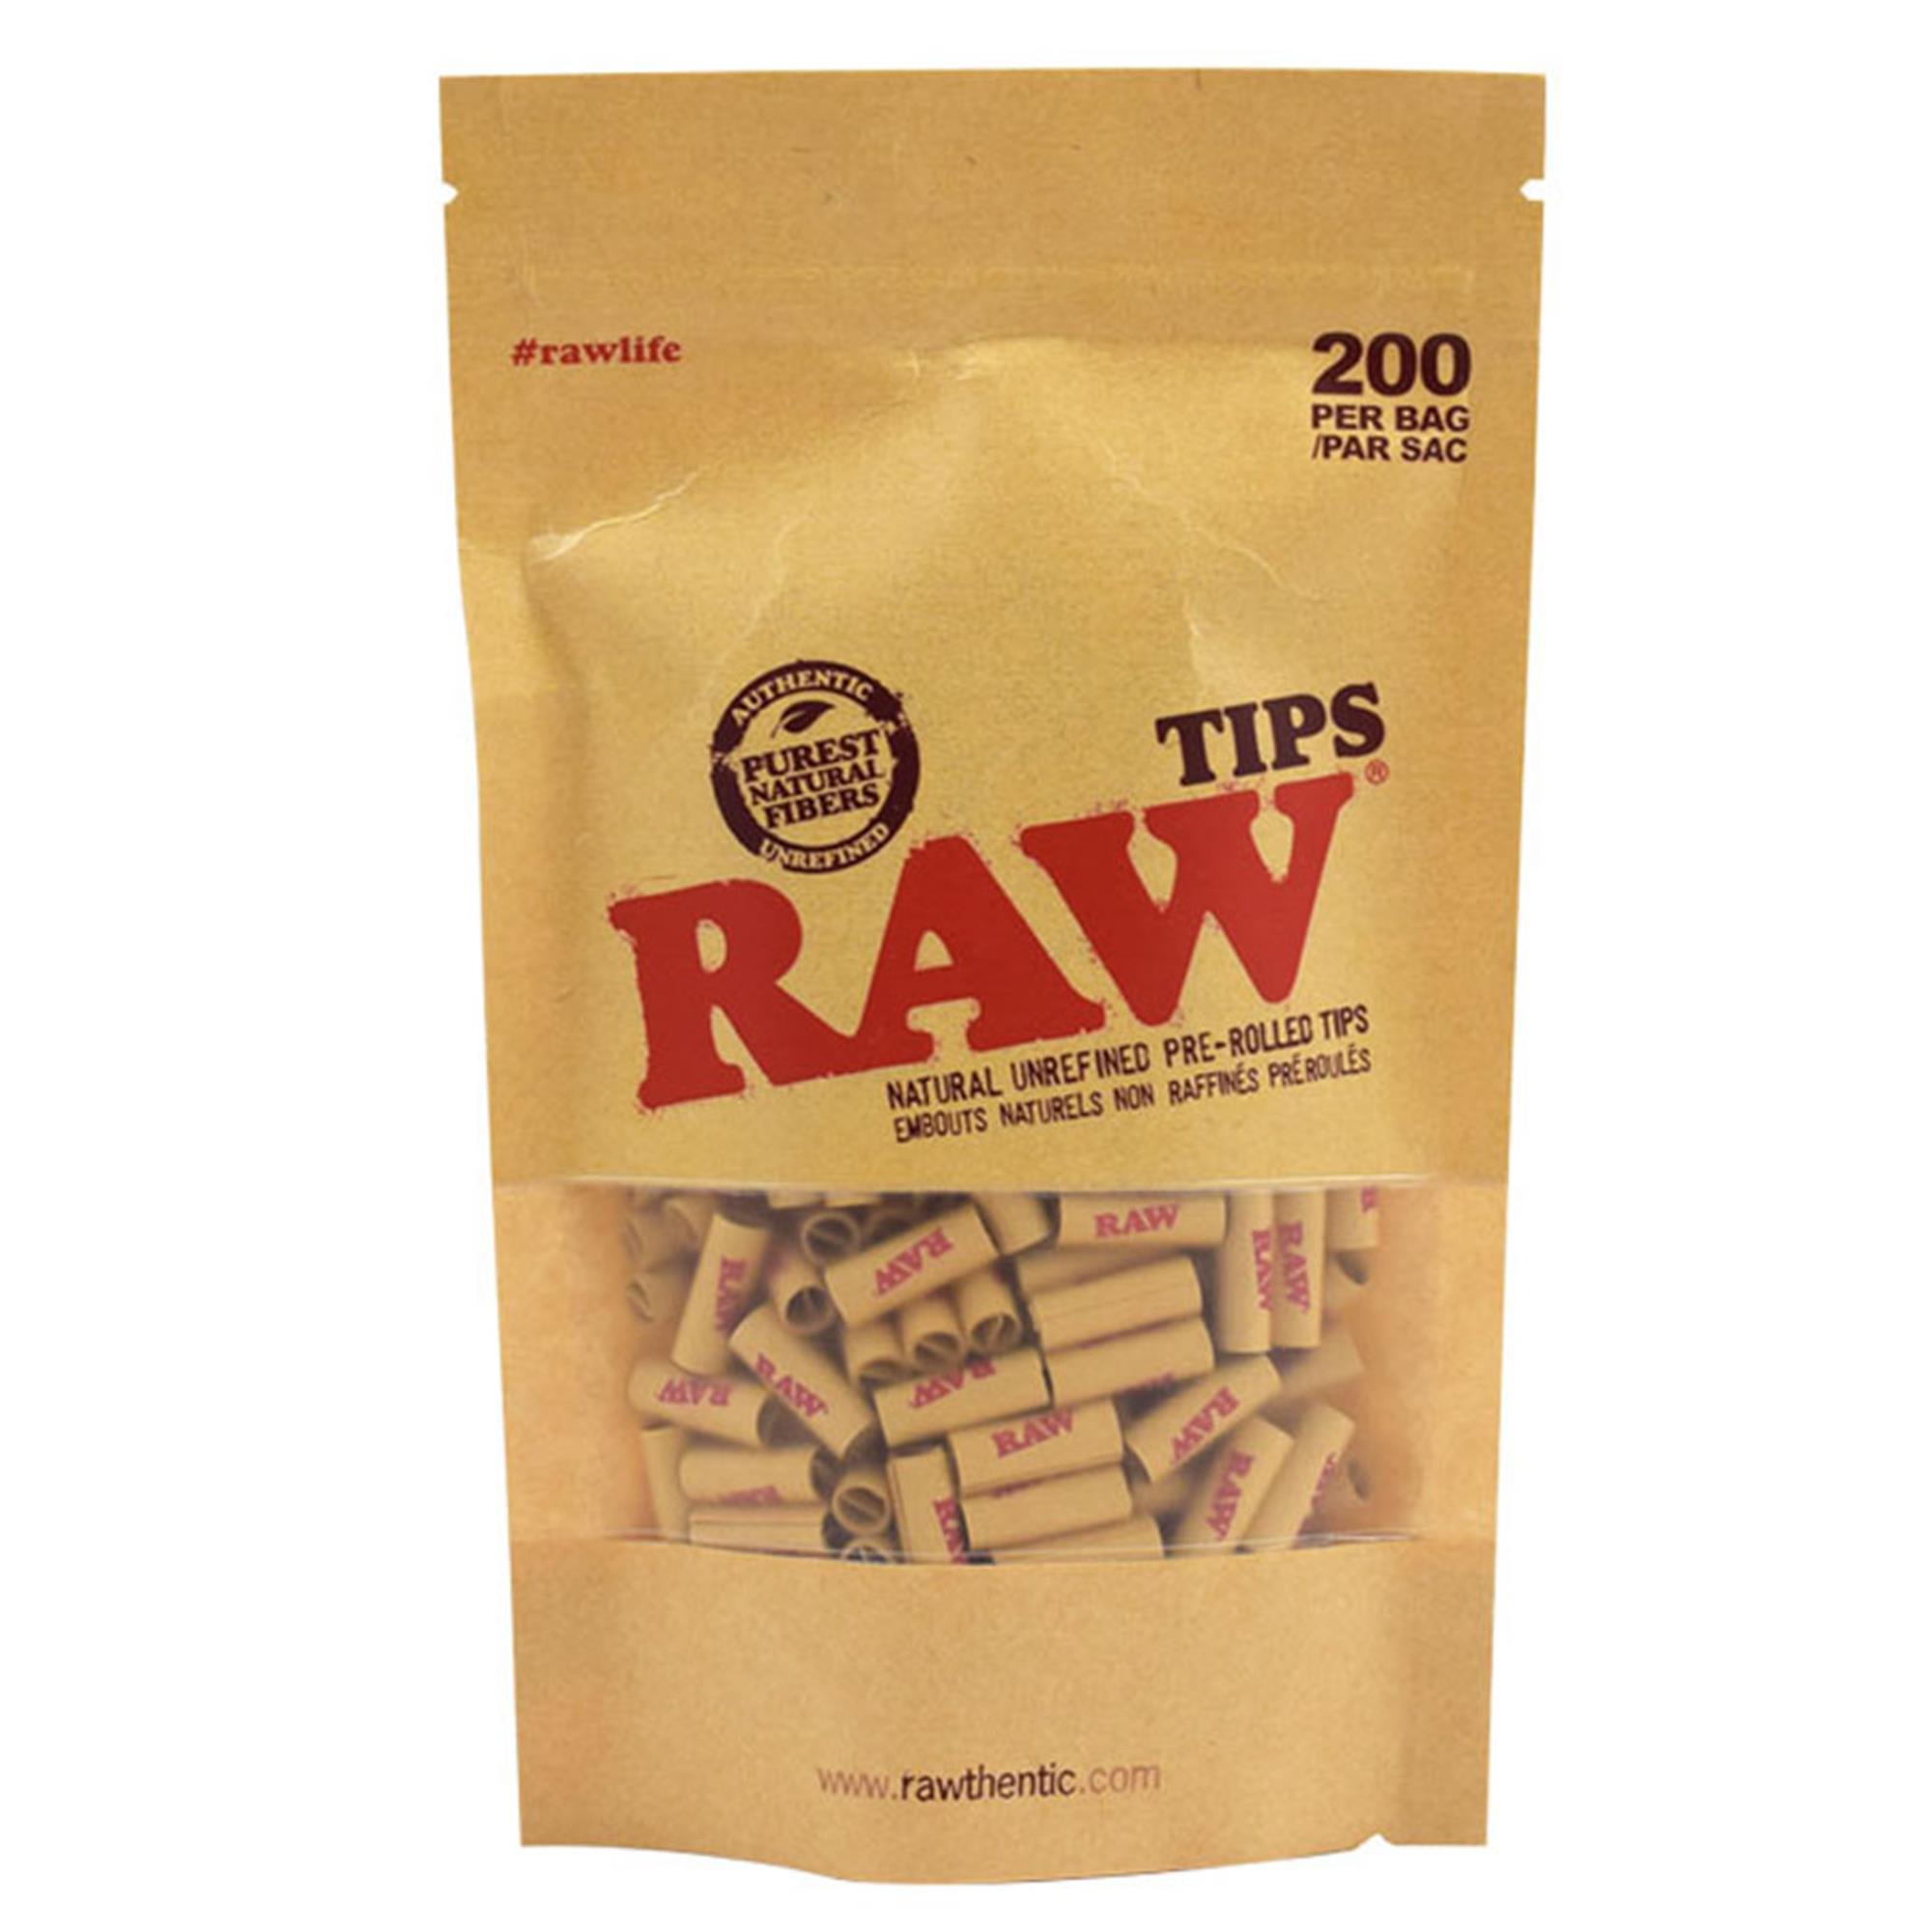 RAW PRE-ROLLED UNBLEACHED TIPS - BAG OF 200